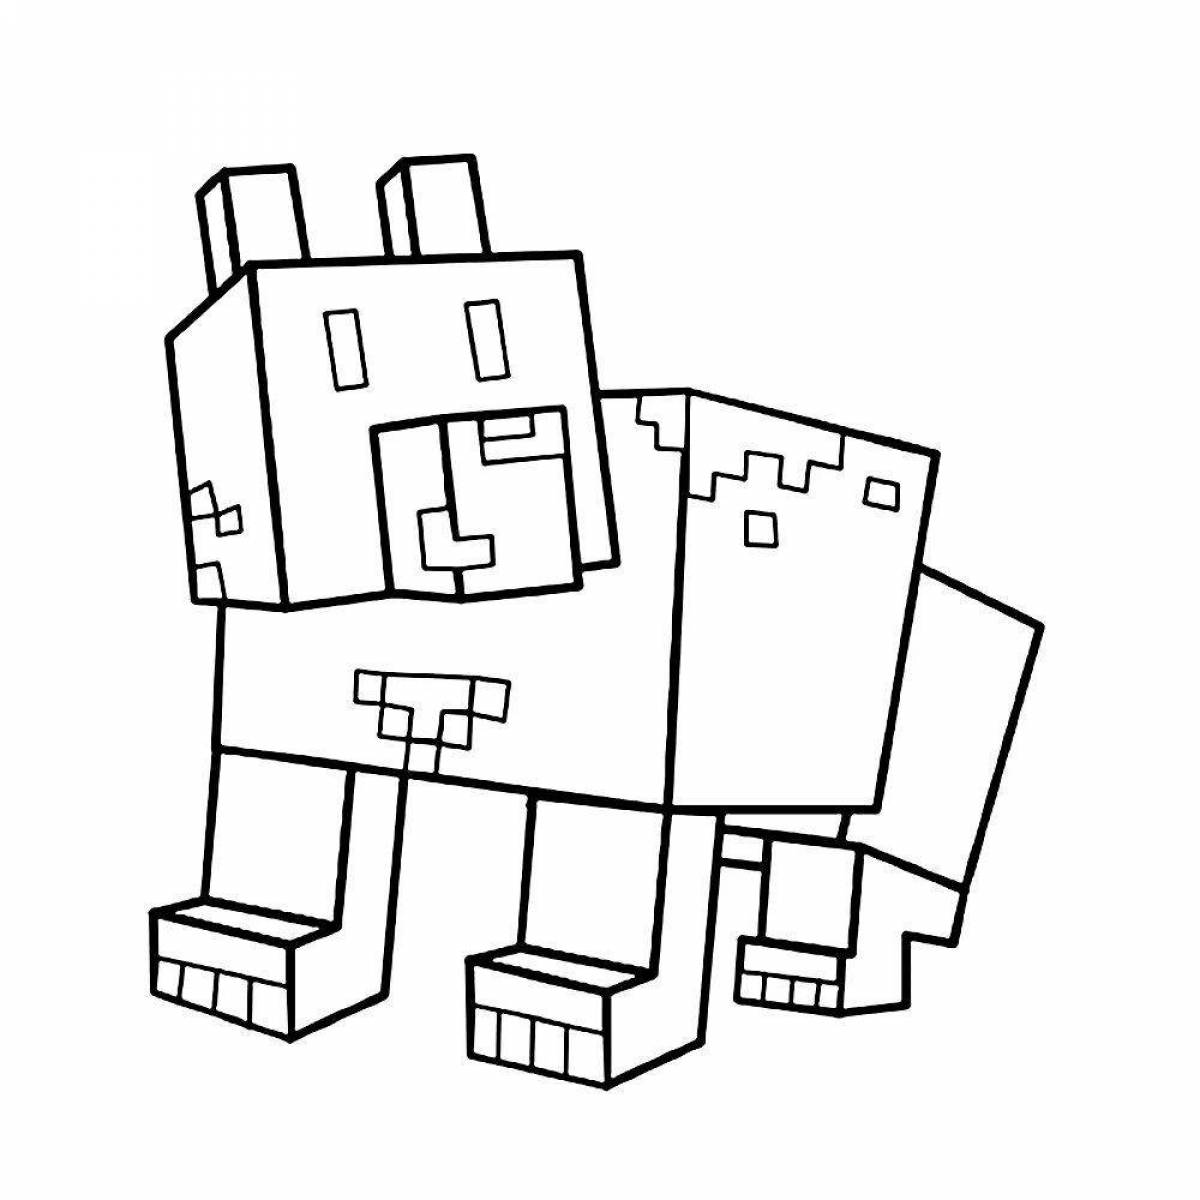 Colorful panda minecraft coloring page